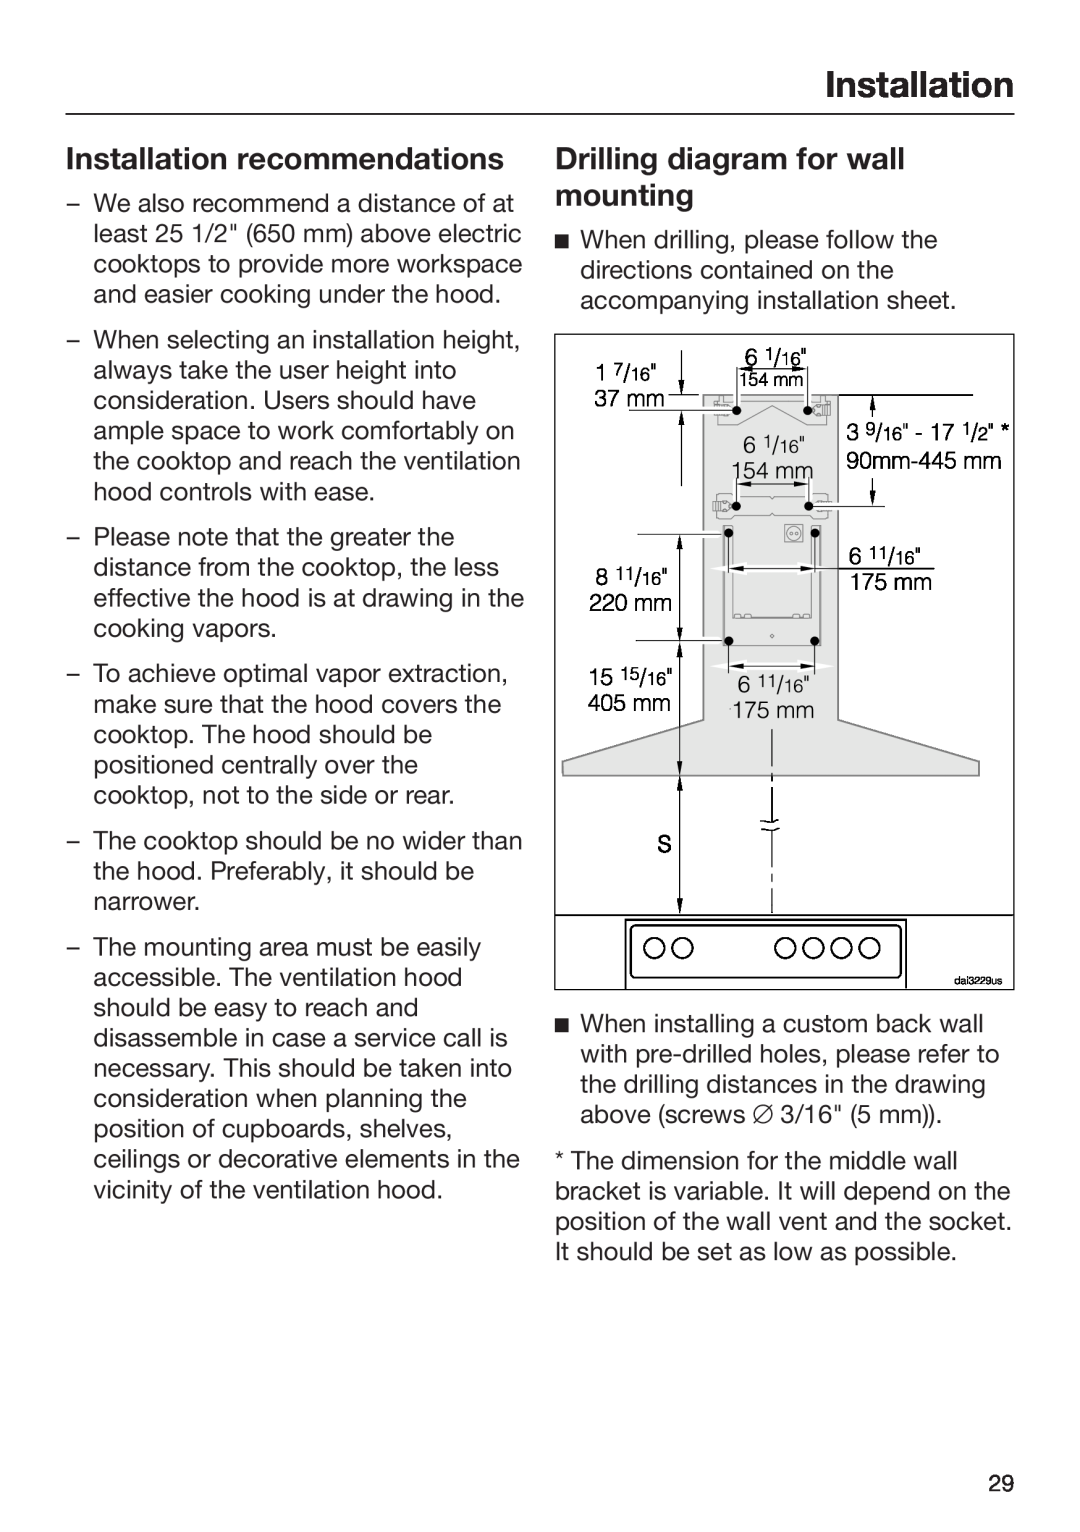 Miele 09 968 240 installation instructions Installation recommendations, Drilling diagram for wall mounting 